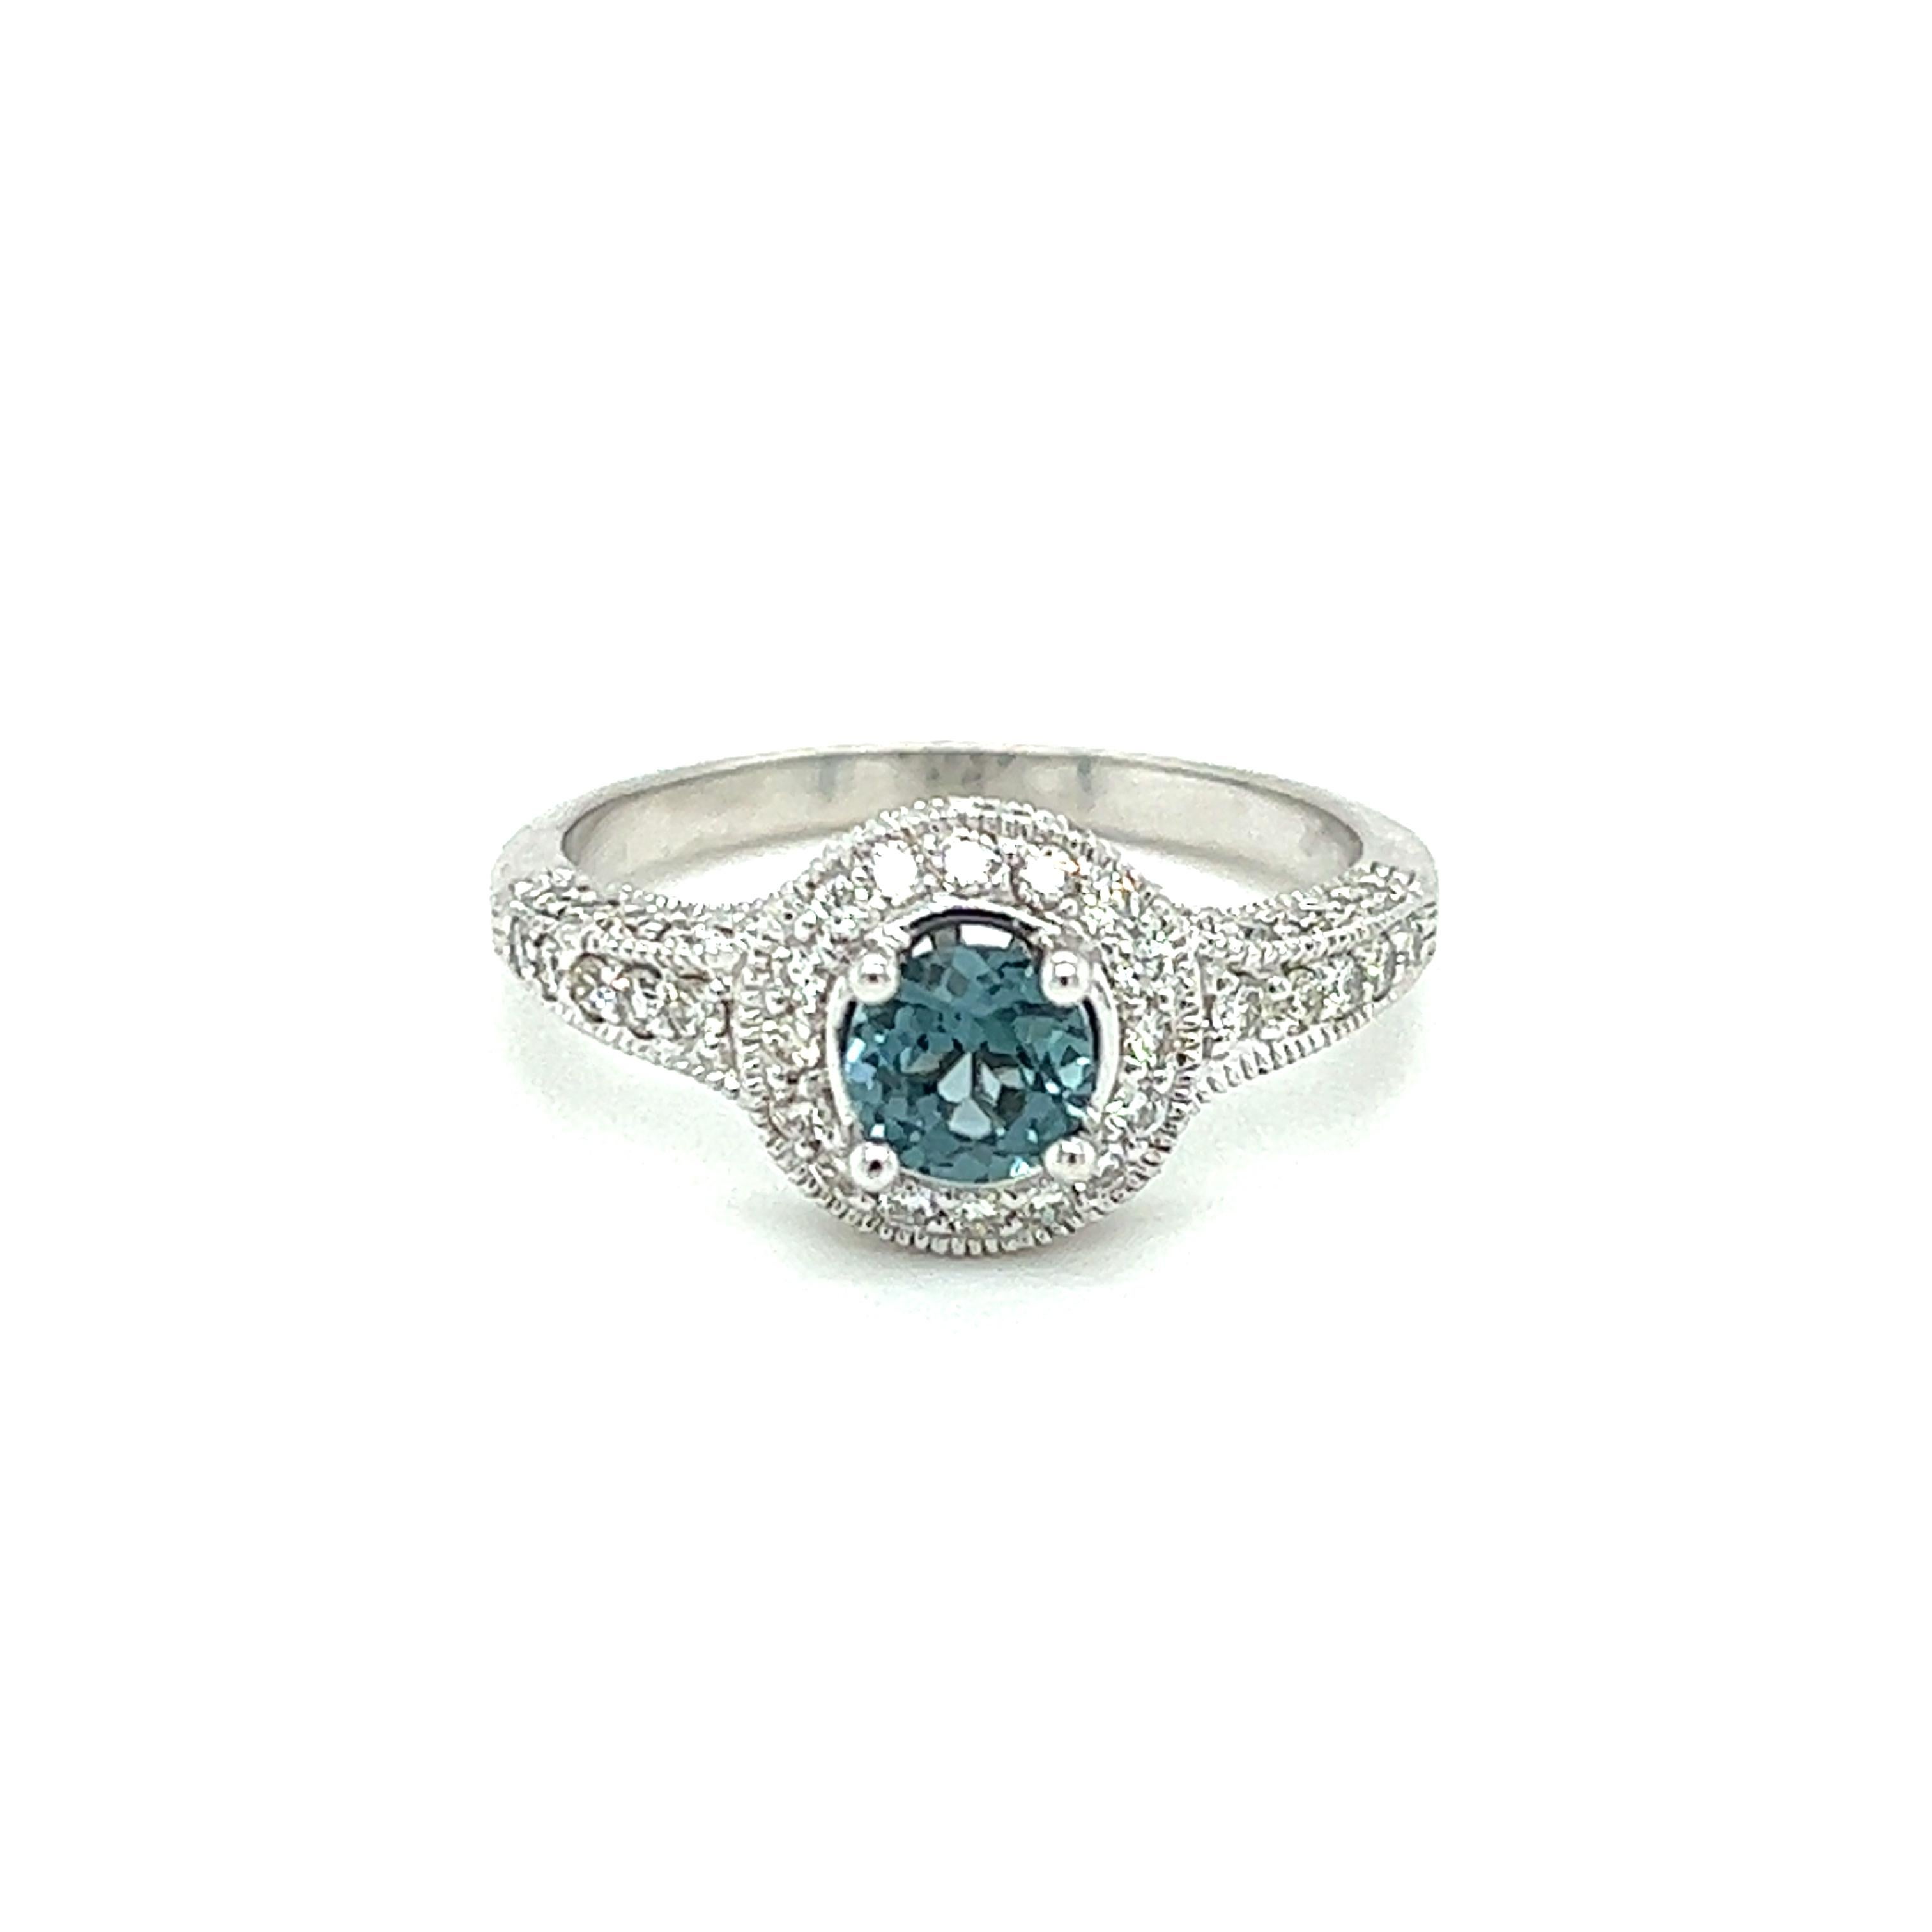 One 14-karat white gold ring set with one 0.72-carat round blue zircon and fifty-six (56) brilliant cut diamonds, approximately 0.52-carat total weight with matching H/I color and SI1 clarity. The ring is a finger size 7 and can be resized.  Sizing